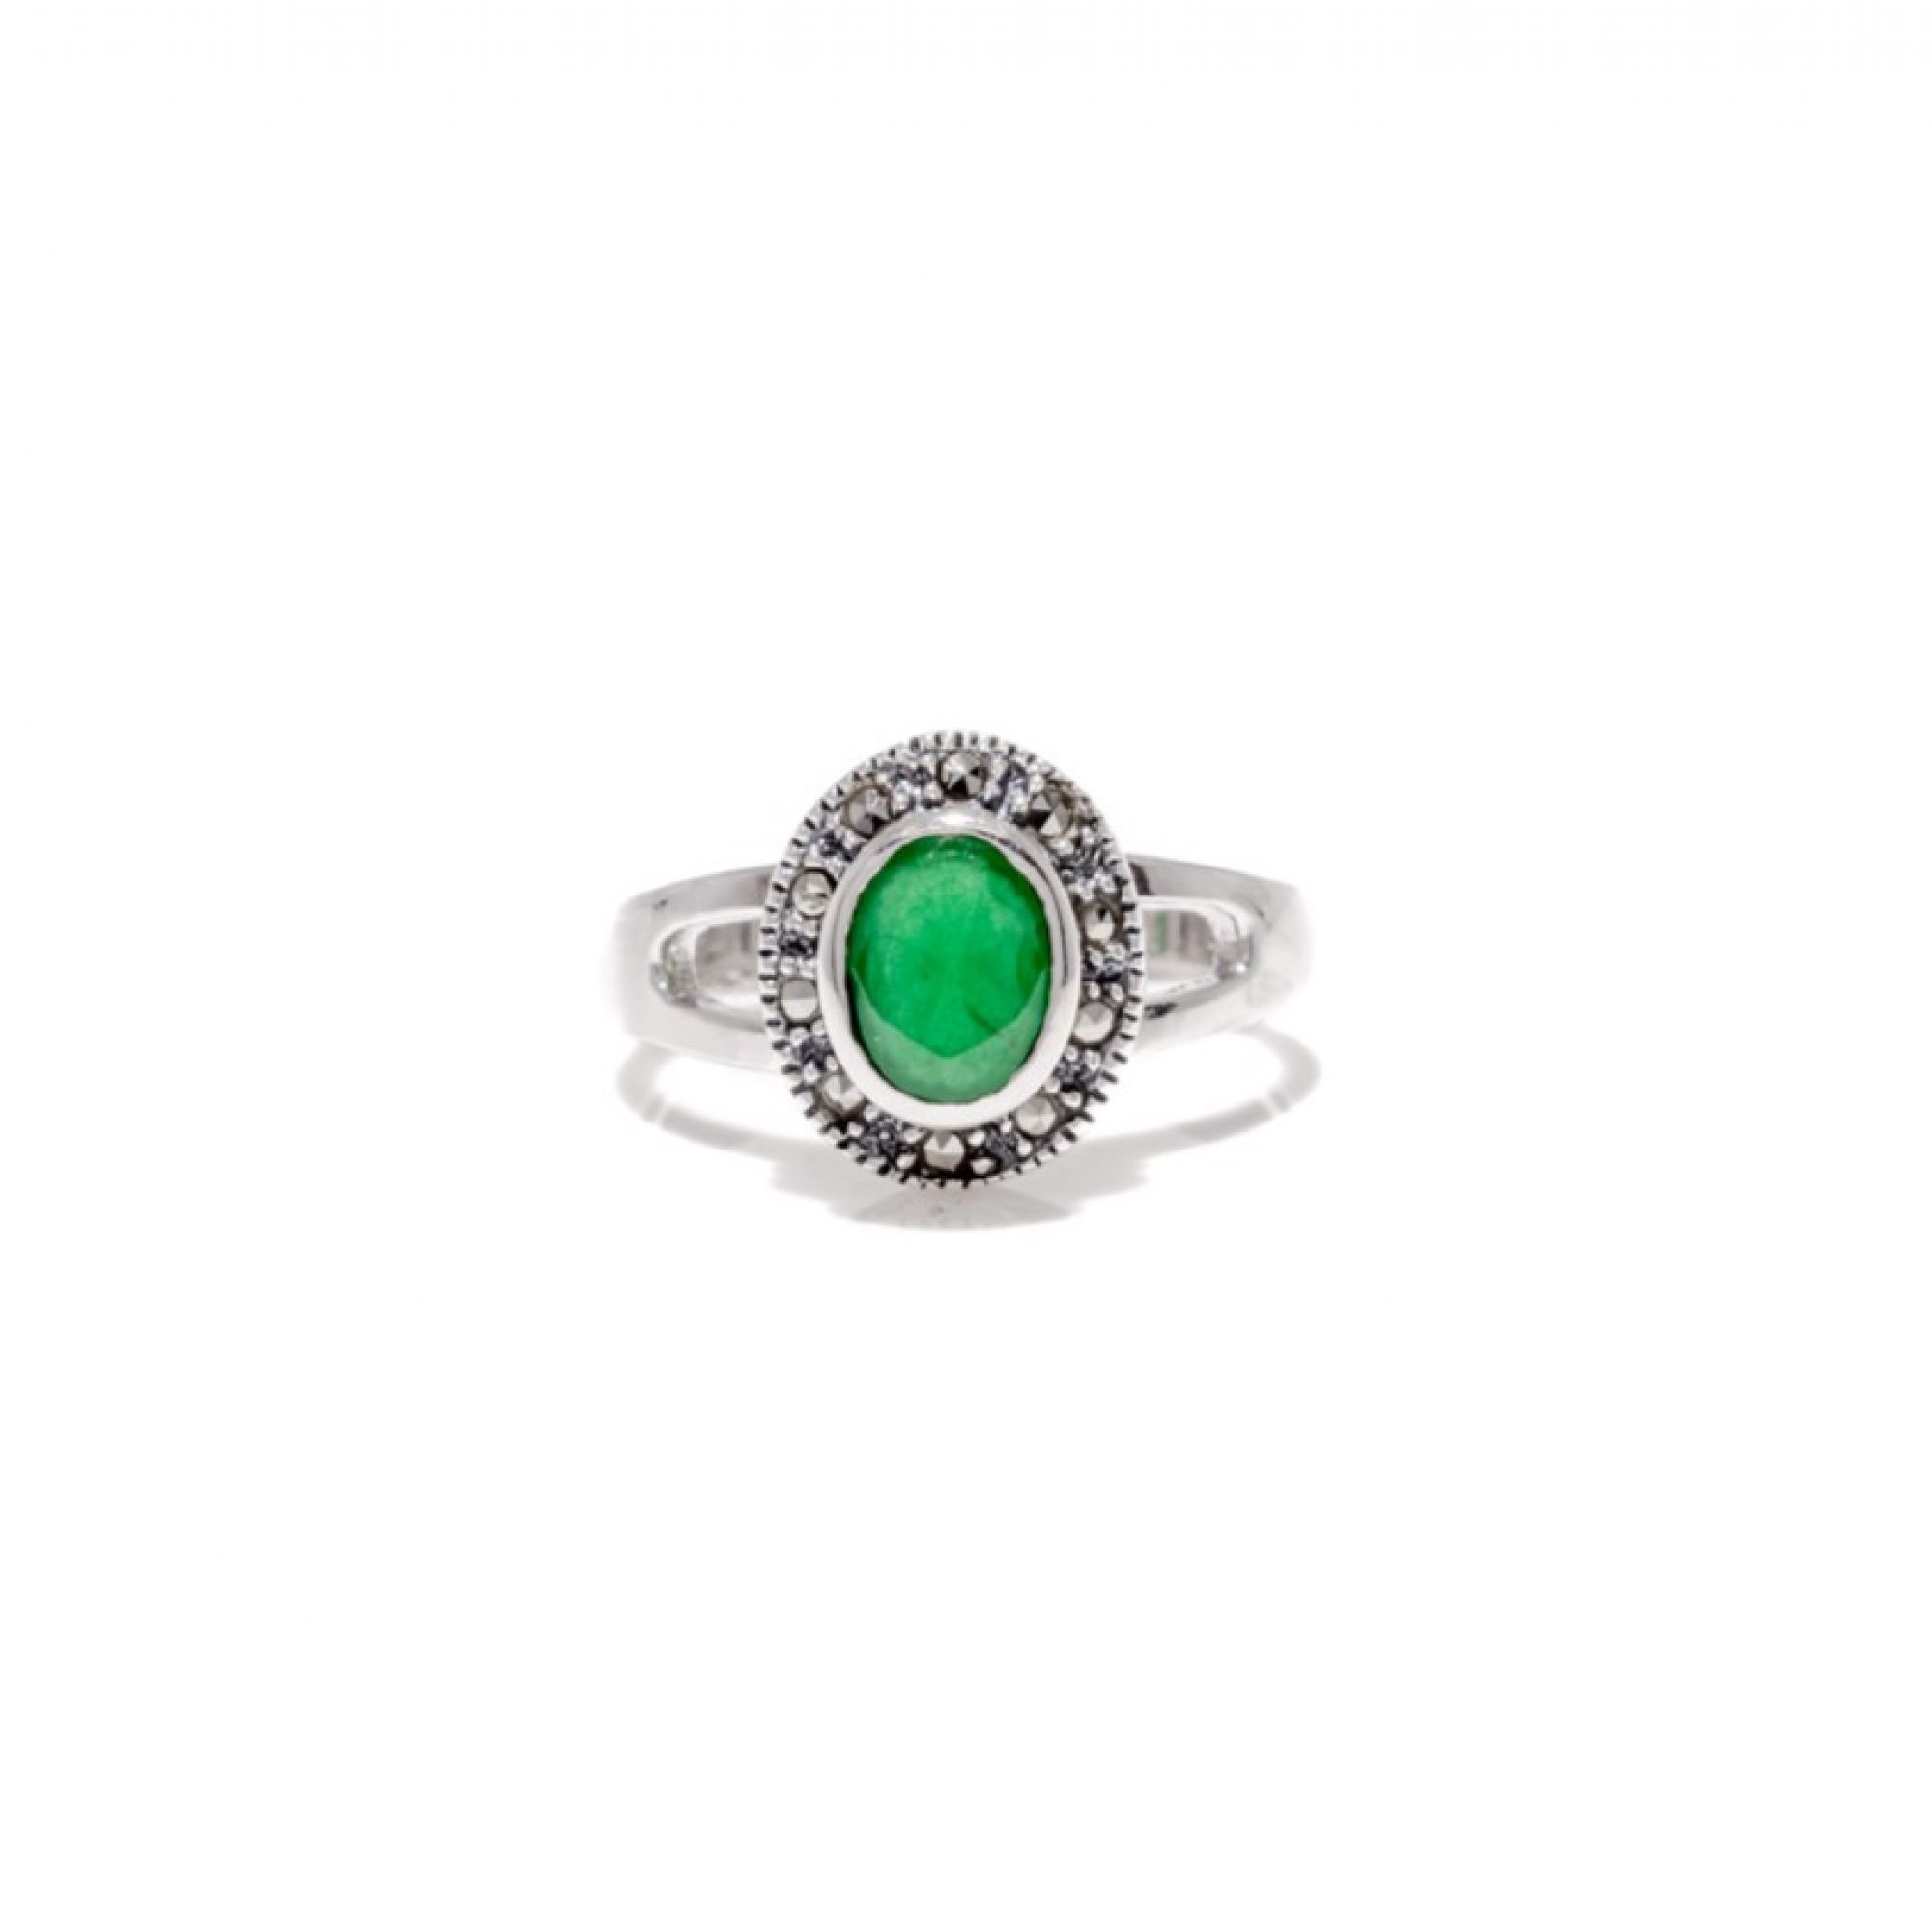 Ring with emerald stone and marcasites